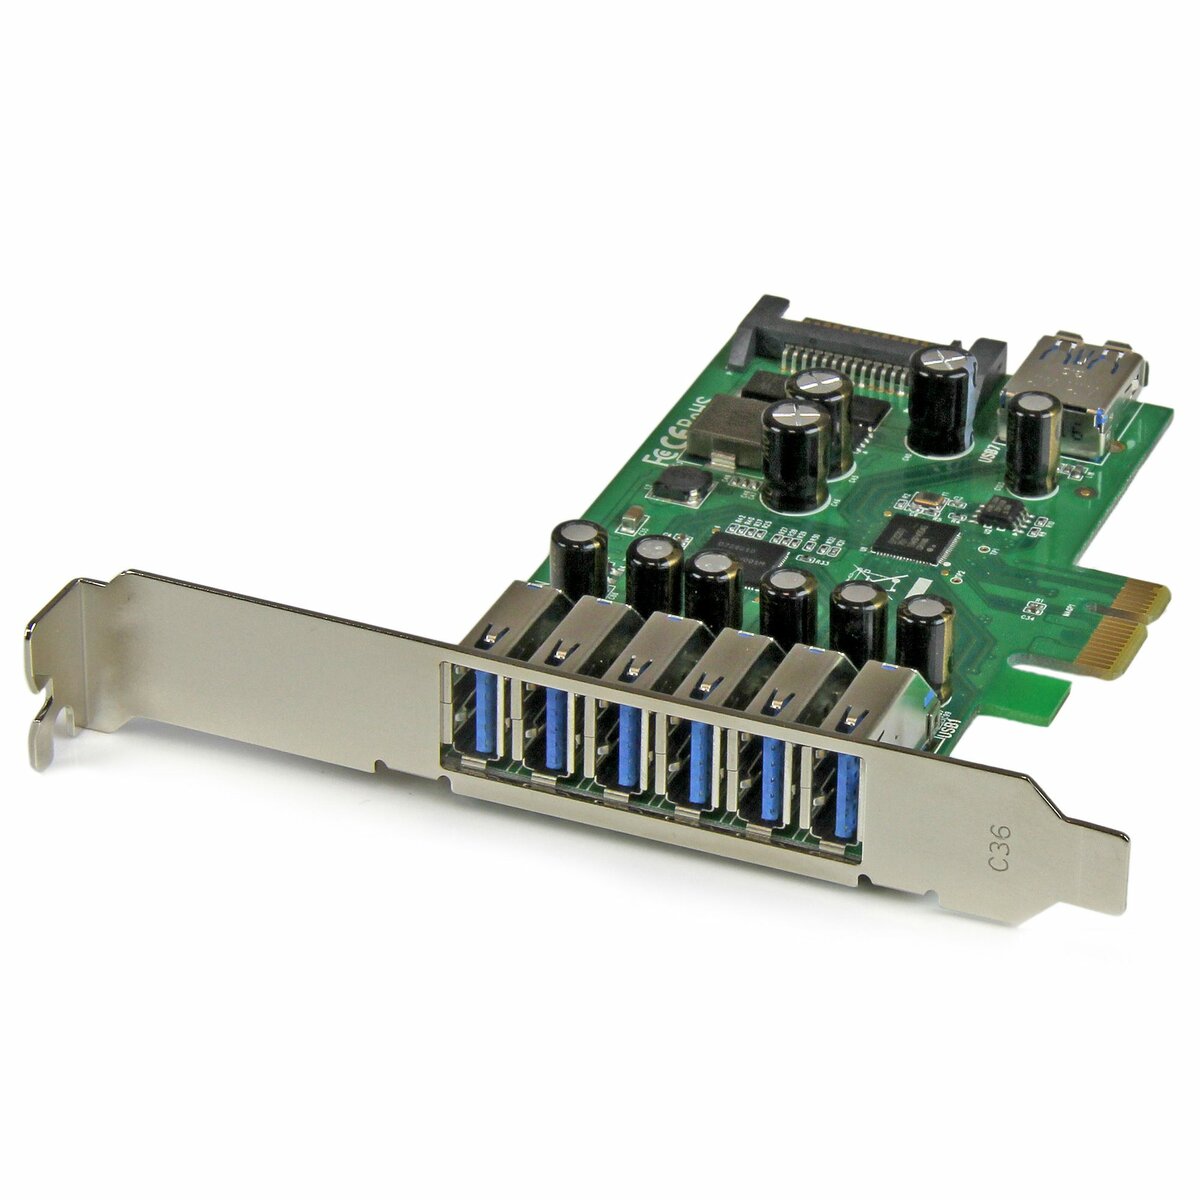 4 Port PCIe USB 3.0 Card w/ 4 Channels - USB 3.0 Cards, Add-on Cards &  Peripherals